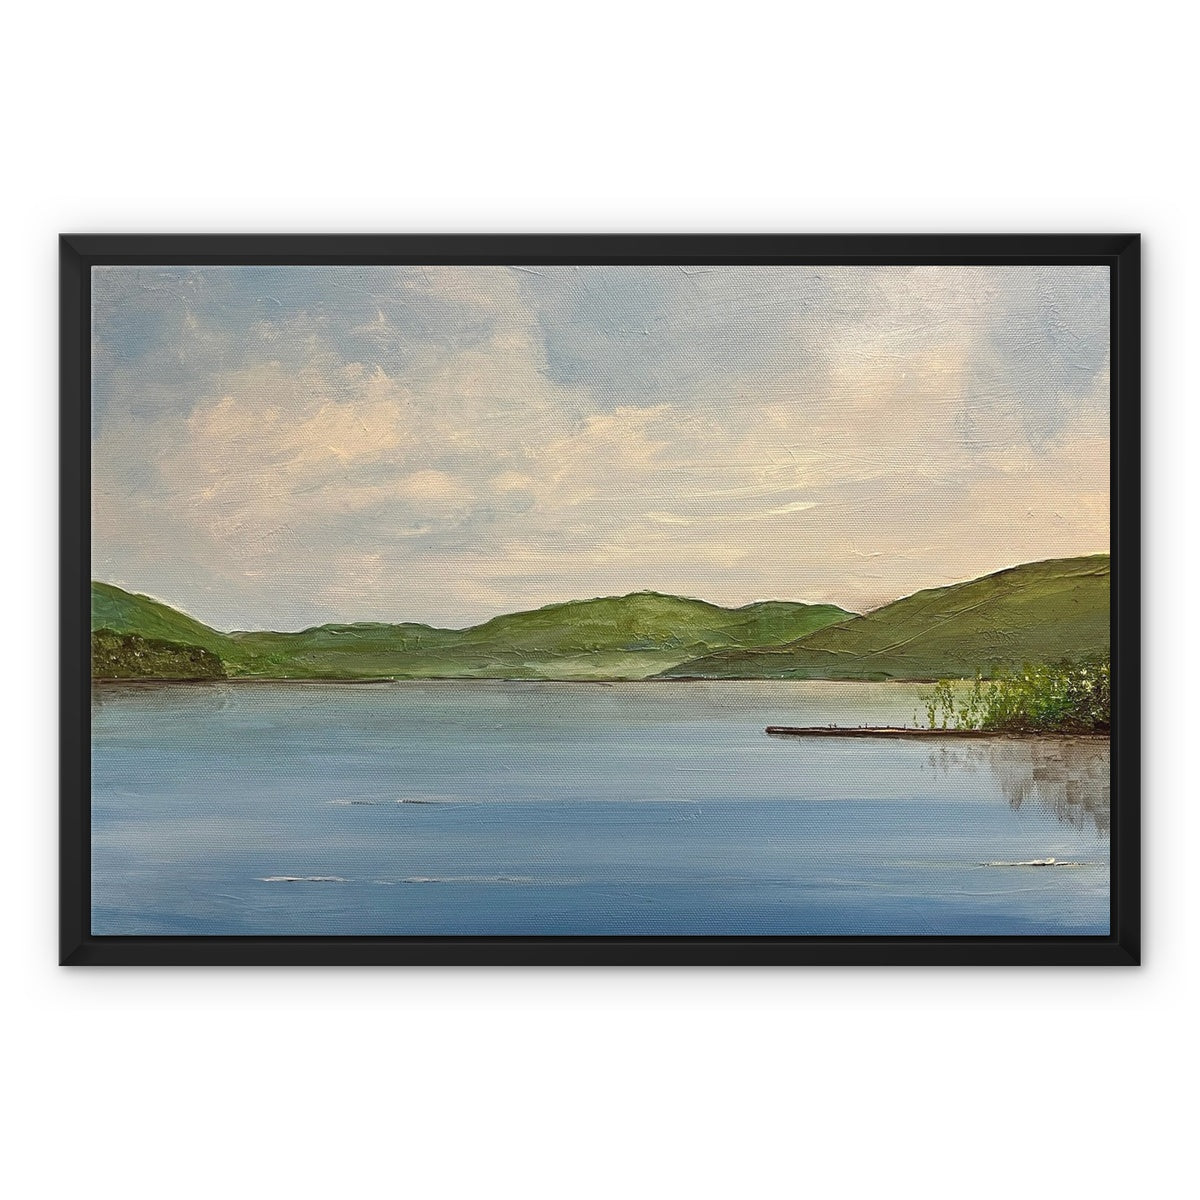 Loch Tay ii Painting | Framed Canvas From Scotland-Floating Framed Canvas Prints-Scottish Lochs & Mountains Art Gallery-24"x18"-Black Frame-Paintings, Prints, Homeware, Art Gifts From Scotland By Scottish Artist Kevin Hunter